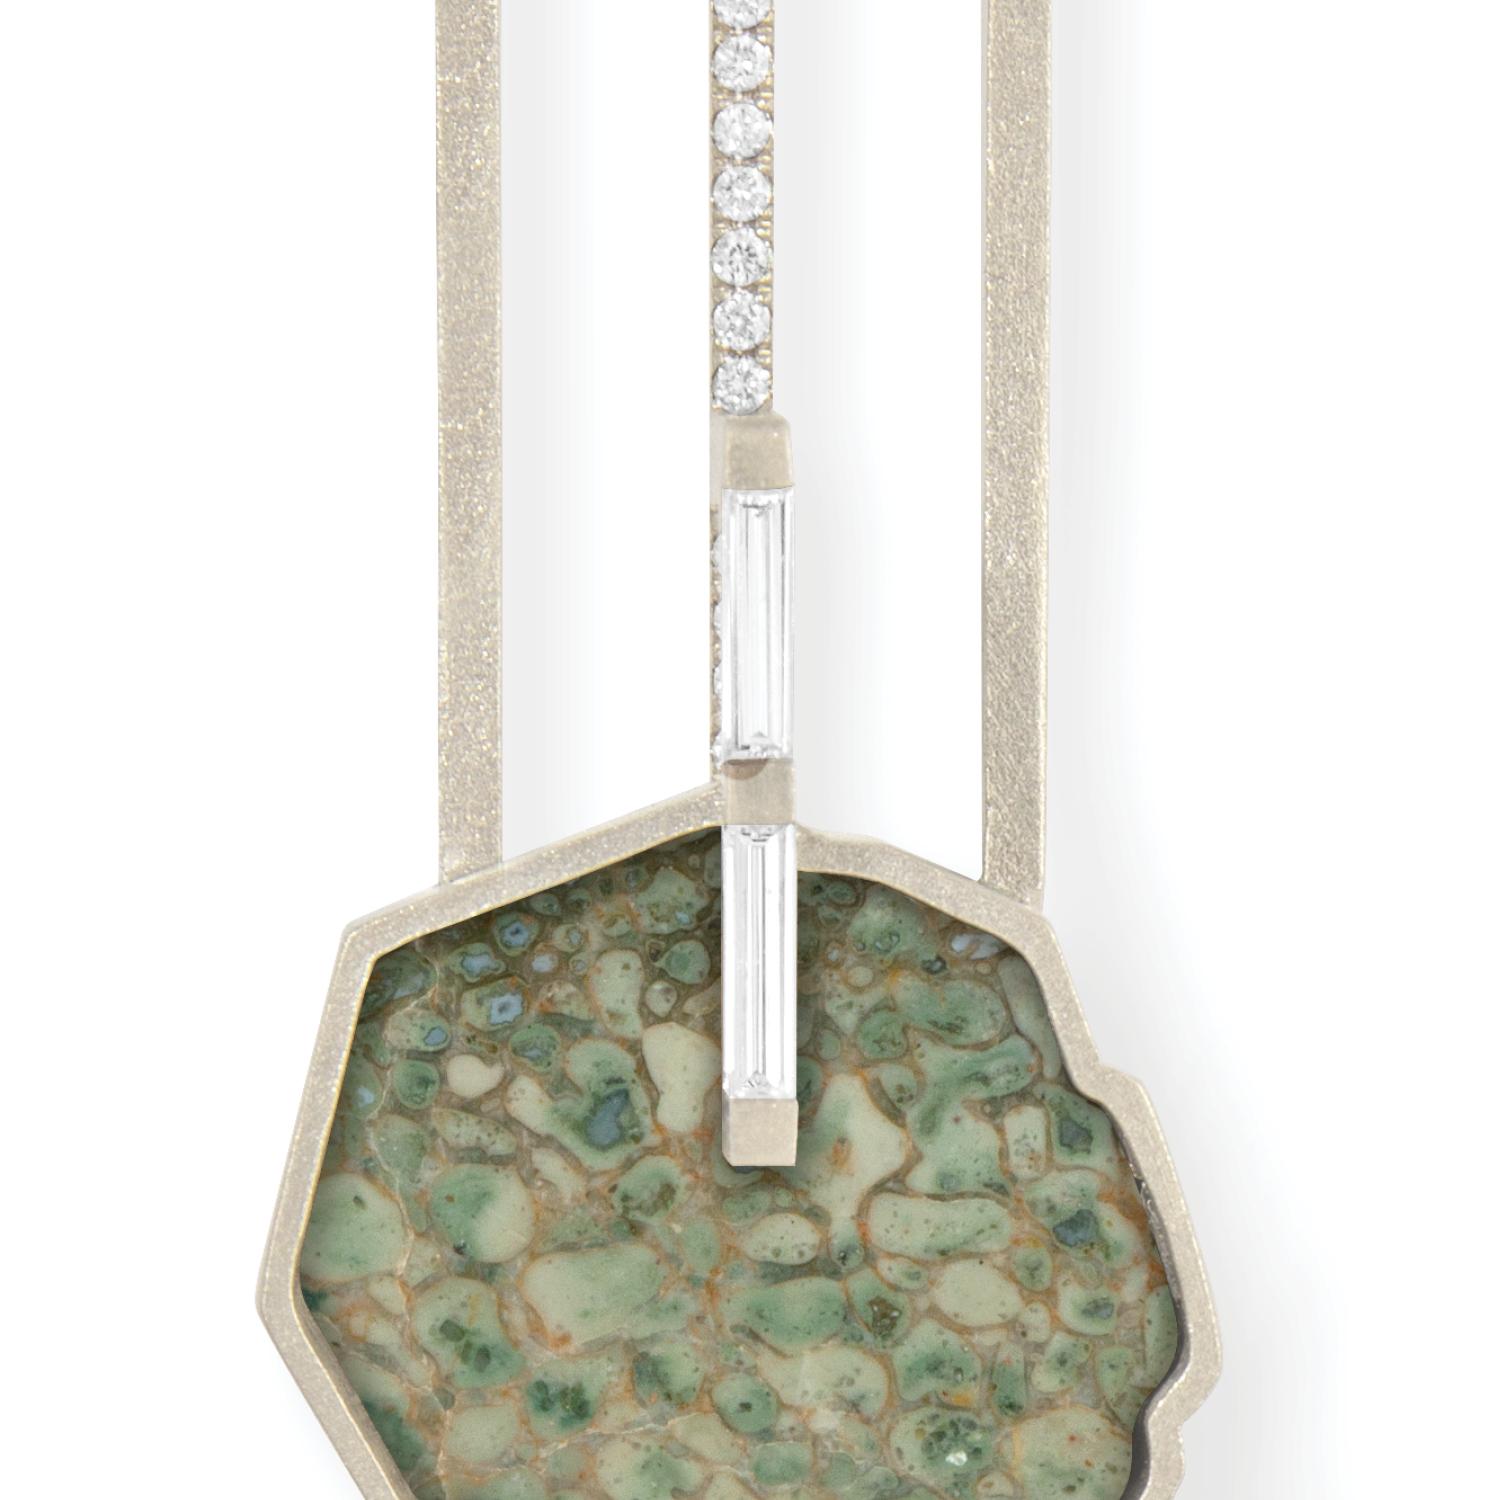 1.16 carat Natural Fancy Greenish Yellow-Gray oval brilliant diamond and green fossilized dinosaur bone vessel necklace with white diamond baguettes and white diamond pavé, 32”, 18 carat recycled white gold

Remarkable natural expressions of  green